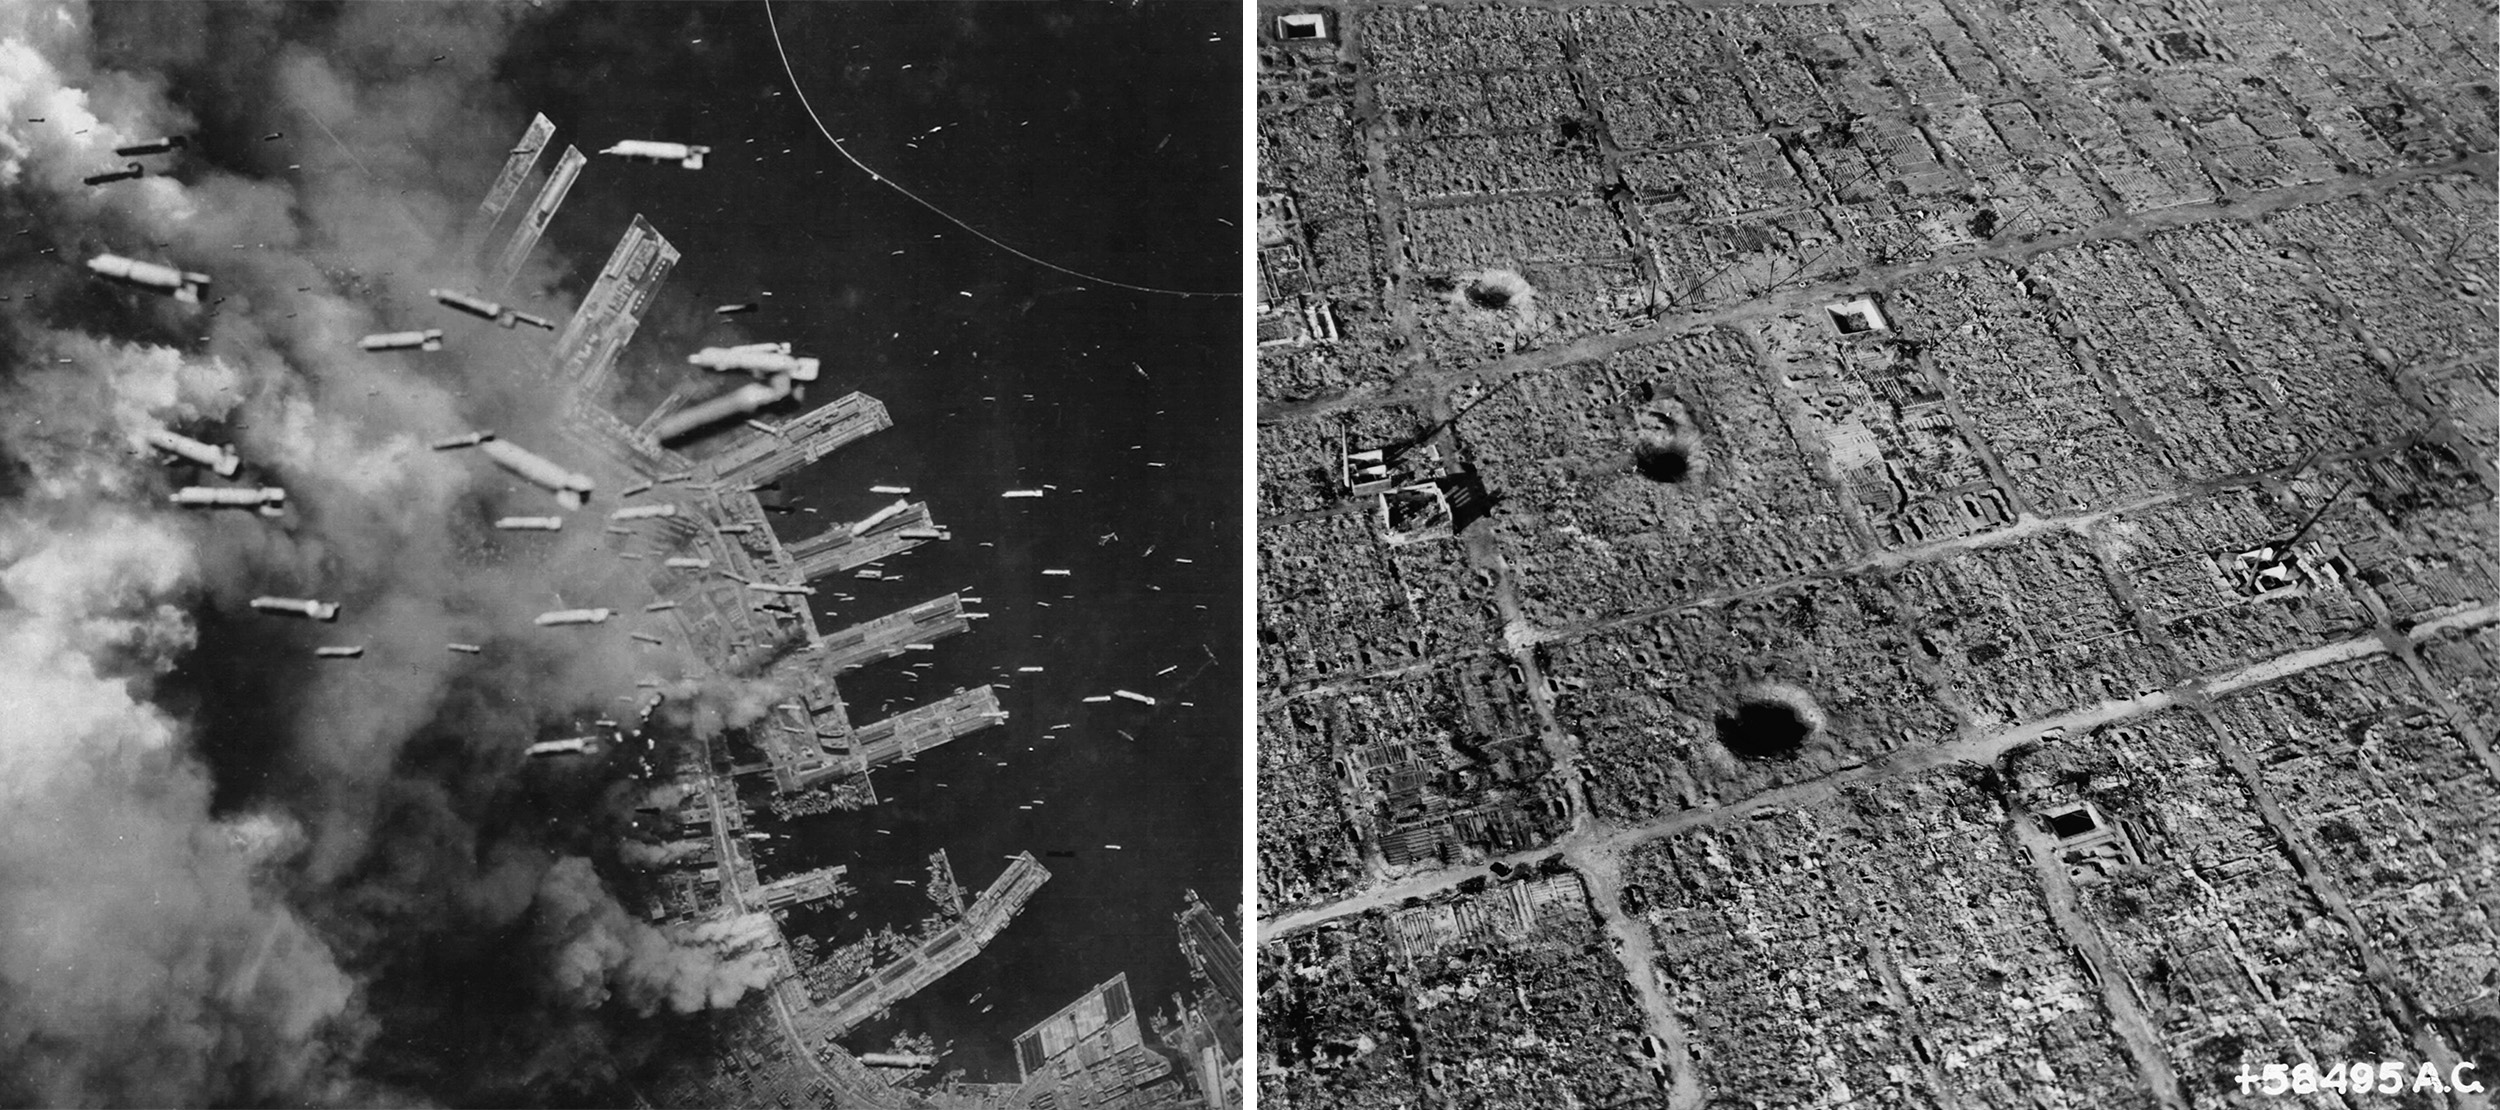 left: incendiary bombs are dropped from U.S. B-29s, Kobe, Japan, June 4, 1945; right: Osaka, Japan, 1945 leveled by fire-bomb attacks by Superfortresses (photo: U.S. Army A.A.F., Library of Congress)